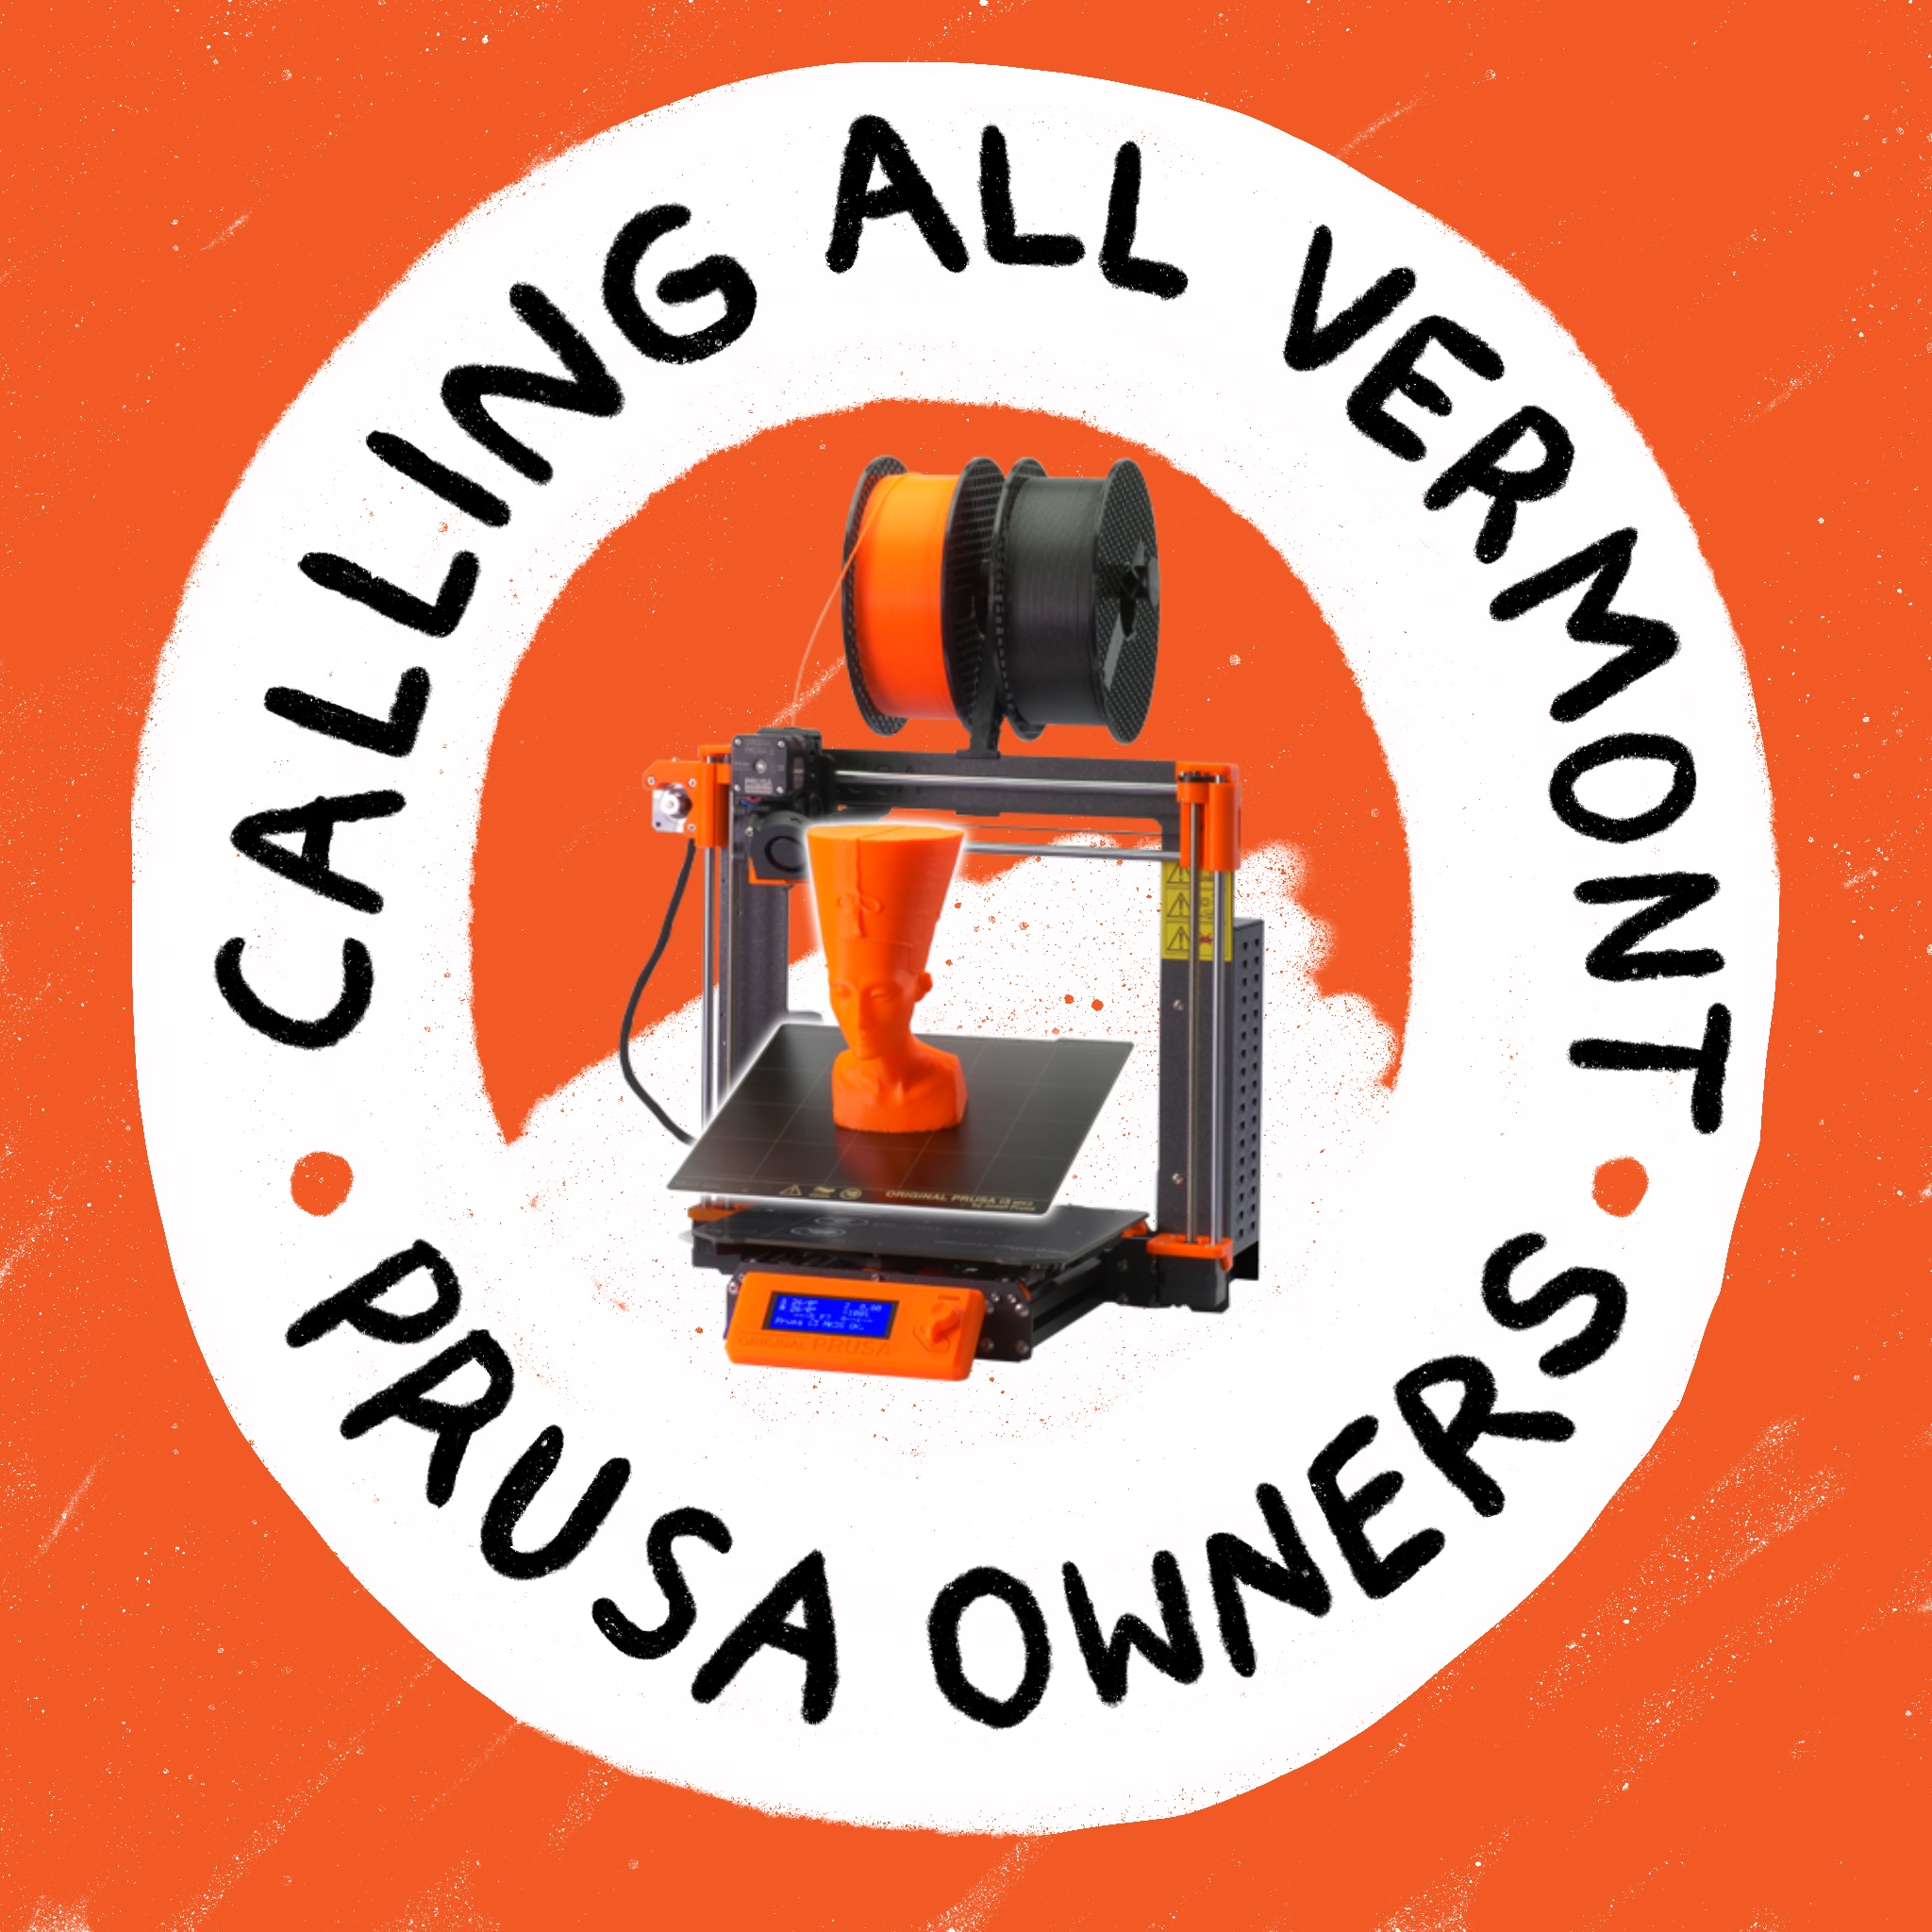 Calling all Vermont Prusa printers! Generator needs your help.